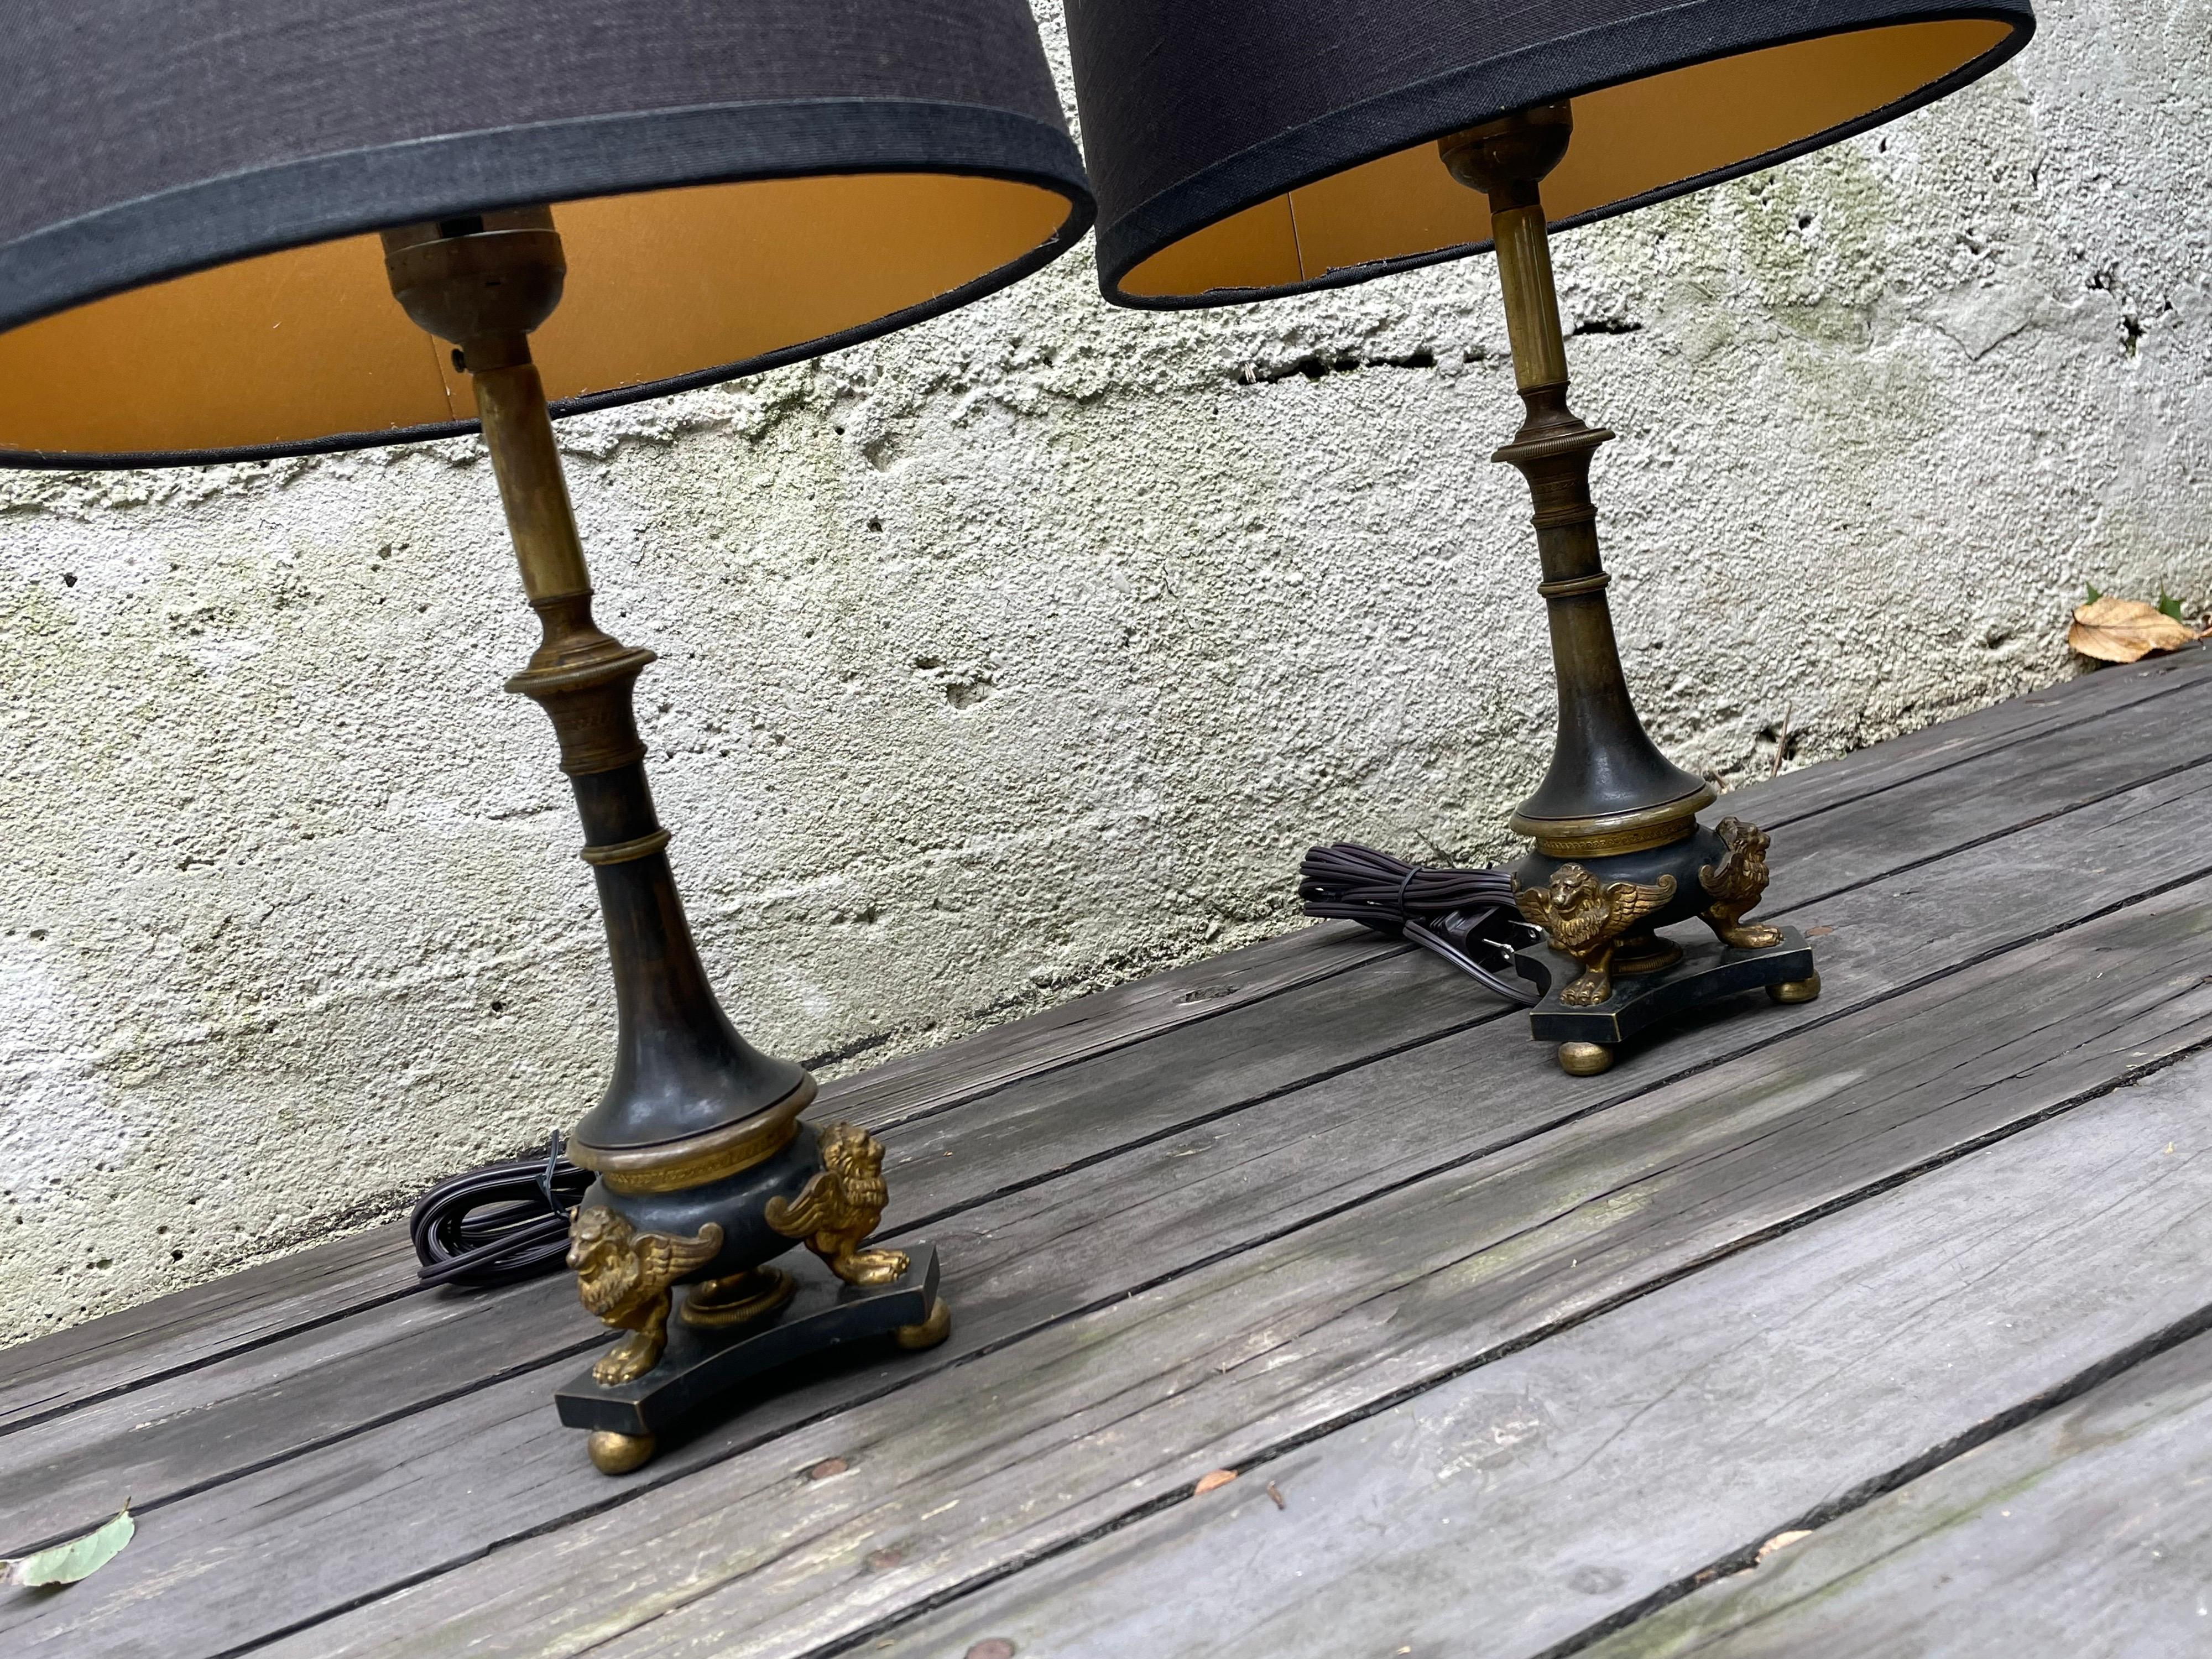 Stunning pair of French bronze small scale table lamps. Assembled with modern elements and shades, these vintage lamps make striking fixtures for a bedroom, library or study. Professionally rewired and new shades included. 12.50 to top of socket,